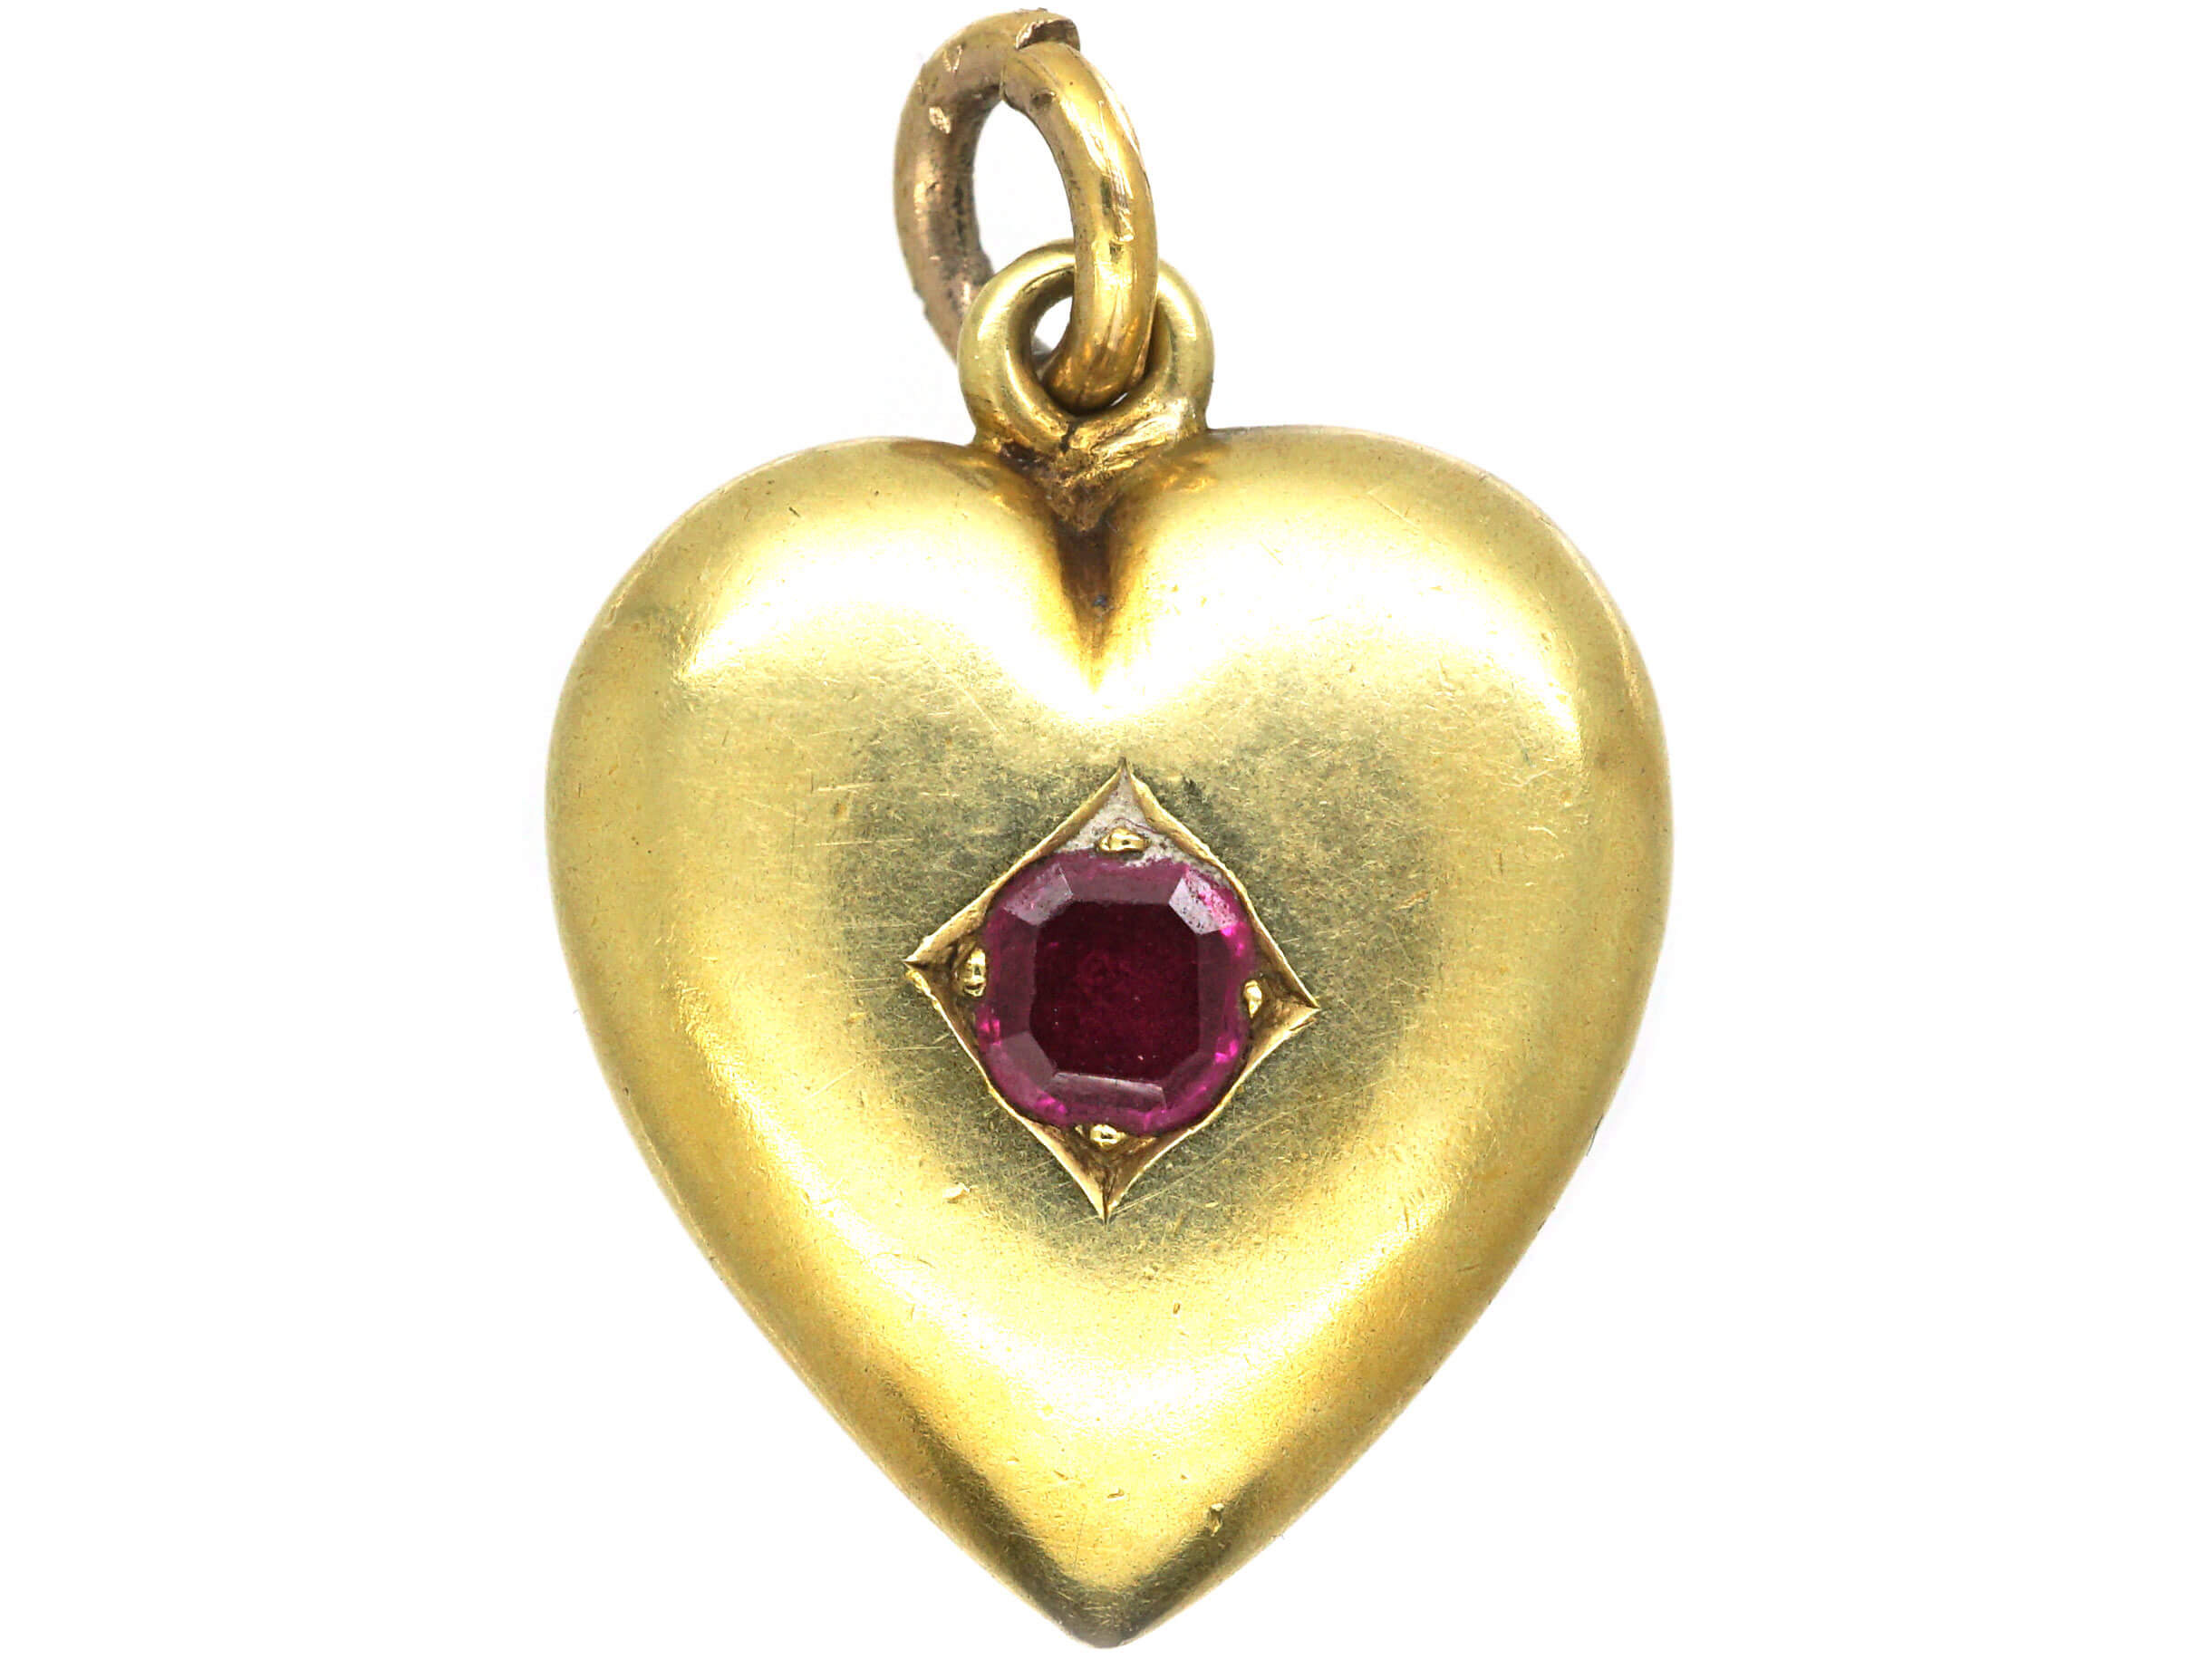 Edwardian 15ct Gold Heart Shaped Pendant set with a Ruby (598N) | The ...